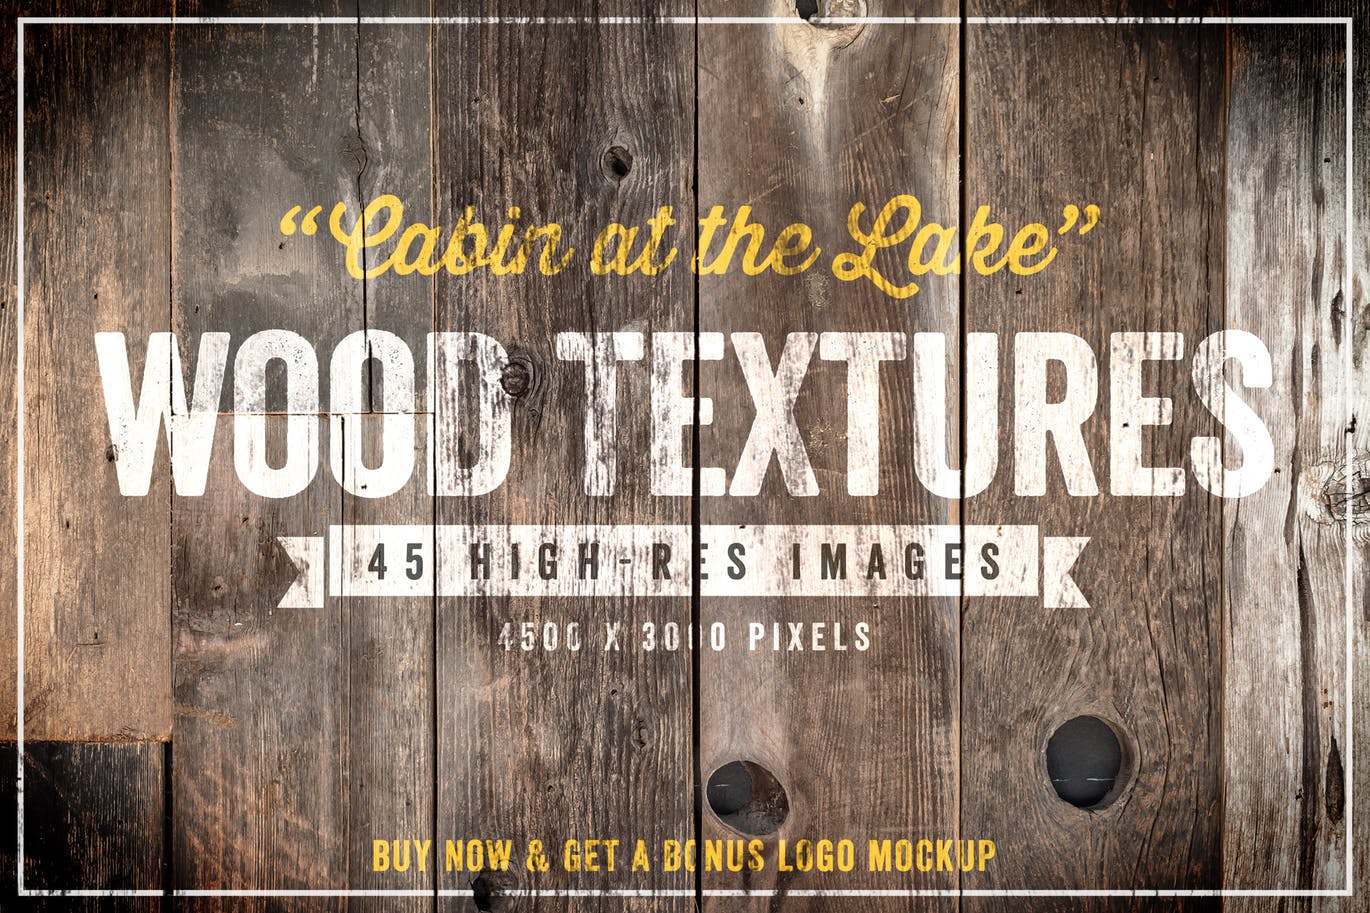 45 high-res wood textures